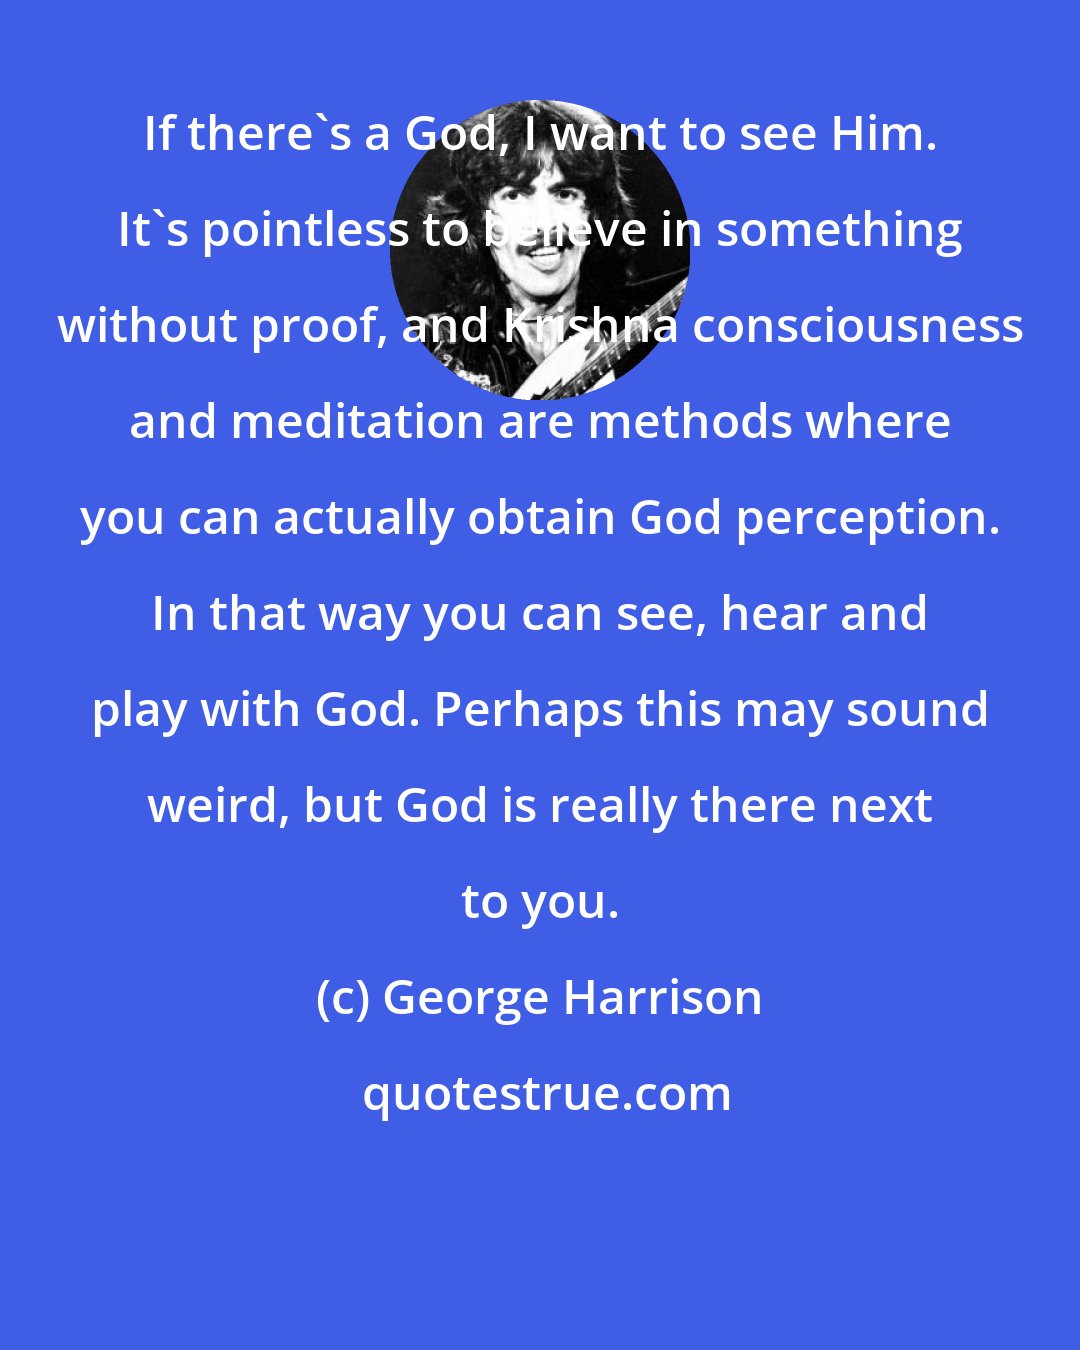 George Harrison: If there's a God, I want to see Him. It's pointless to believe in something without proof, and Krishna consciousness and meditation are methods where you can actually obtain God perception. In that way you can see, hear and play with God. Perhaps this may sound weird, but God is really there next to you.